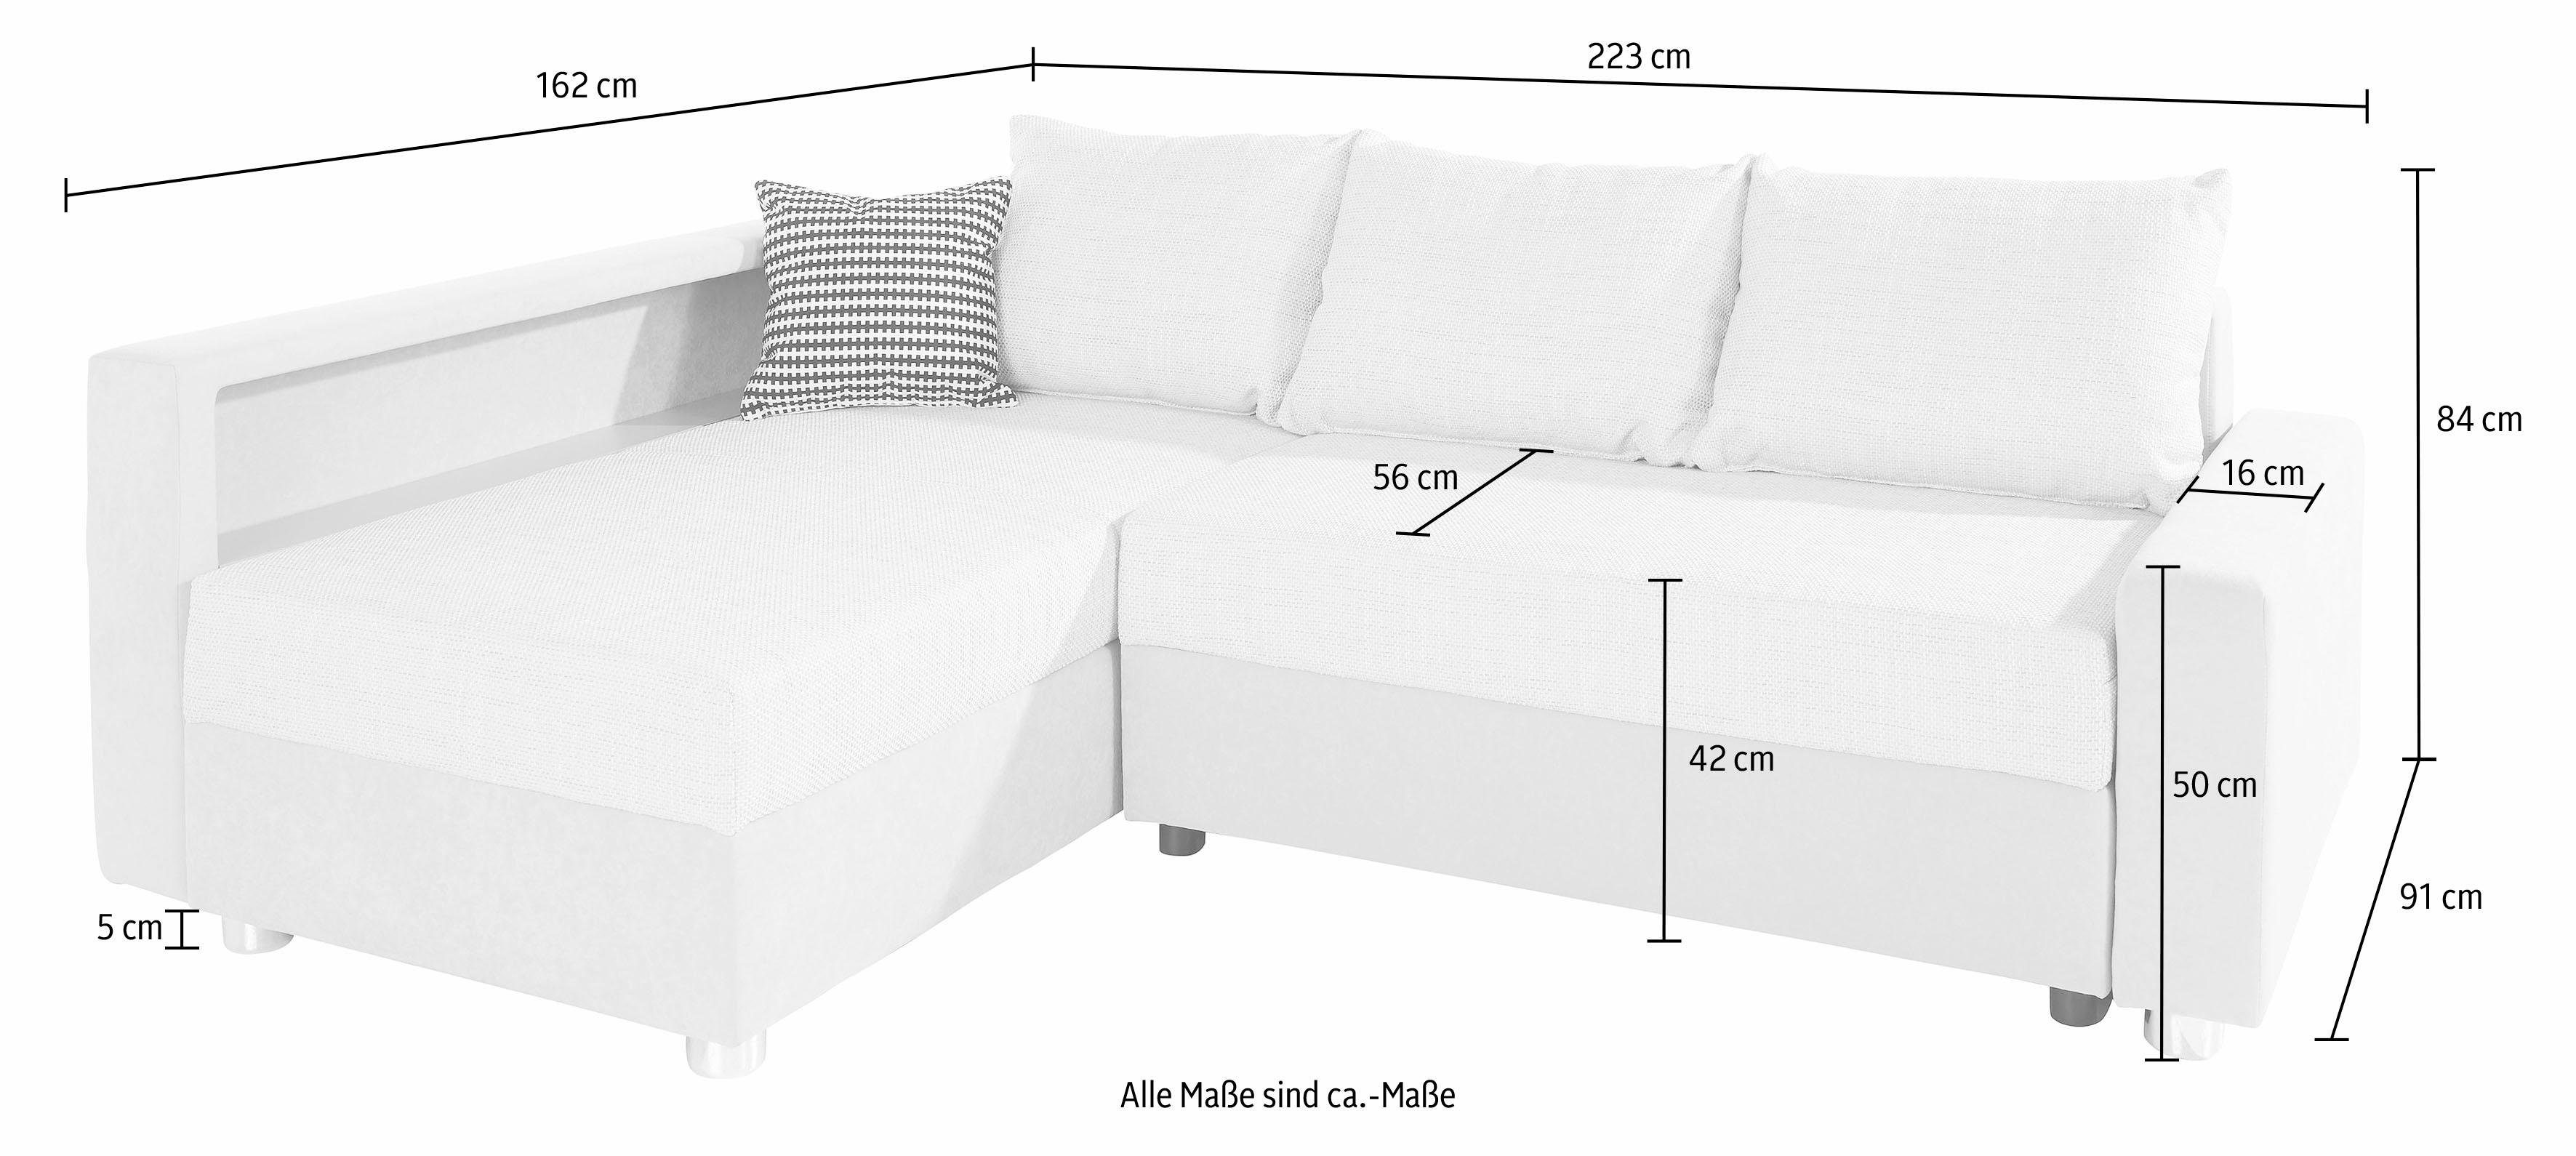 COLLECTION AB Ecksofa Relax, inklusive Bettfunktion, Federkern, mit wahlweise RGB-LED-Beleuchtung